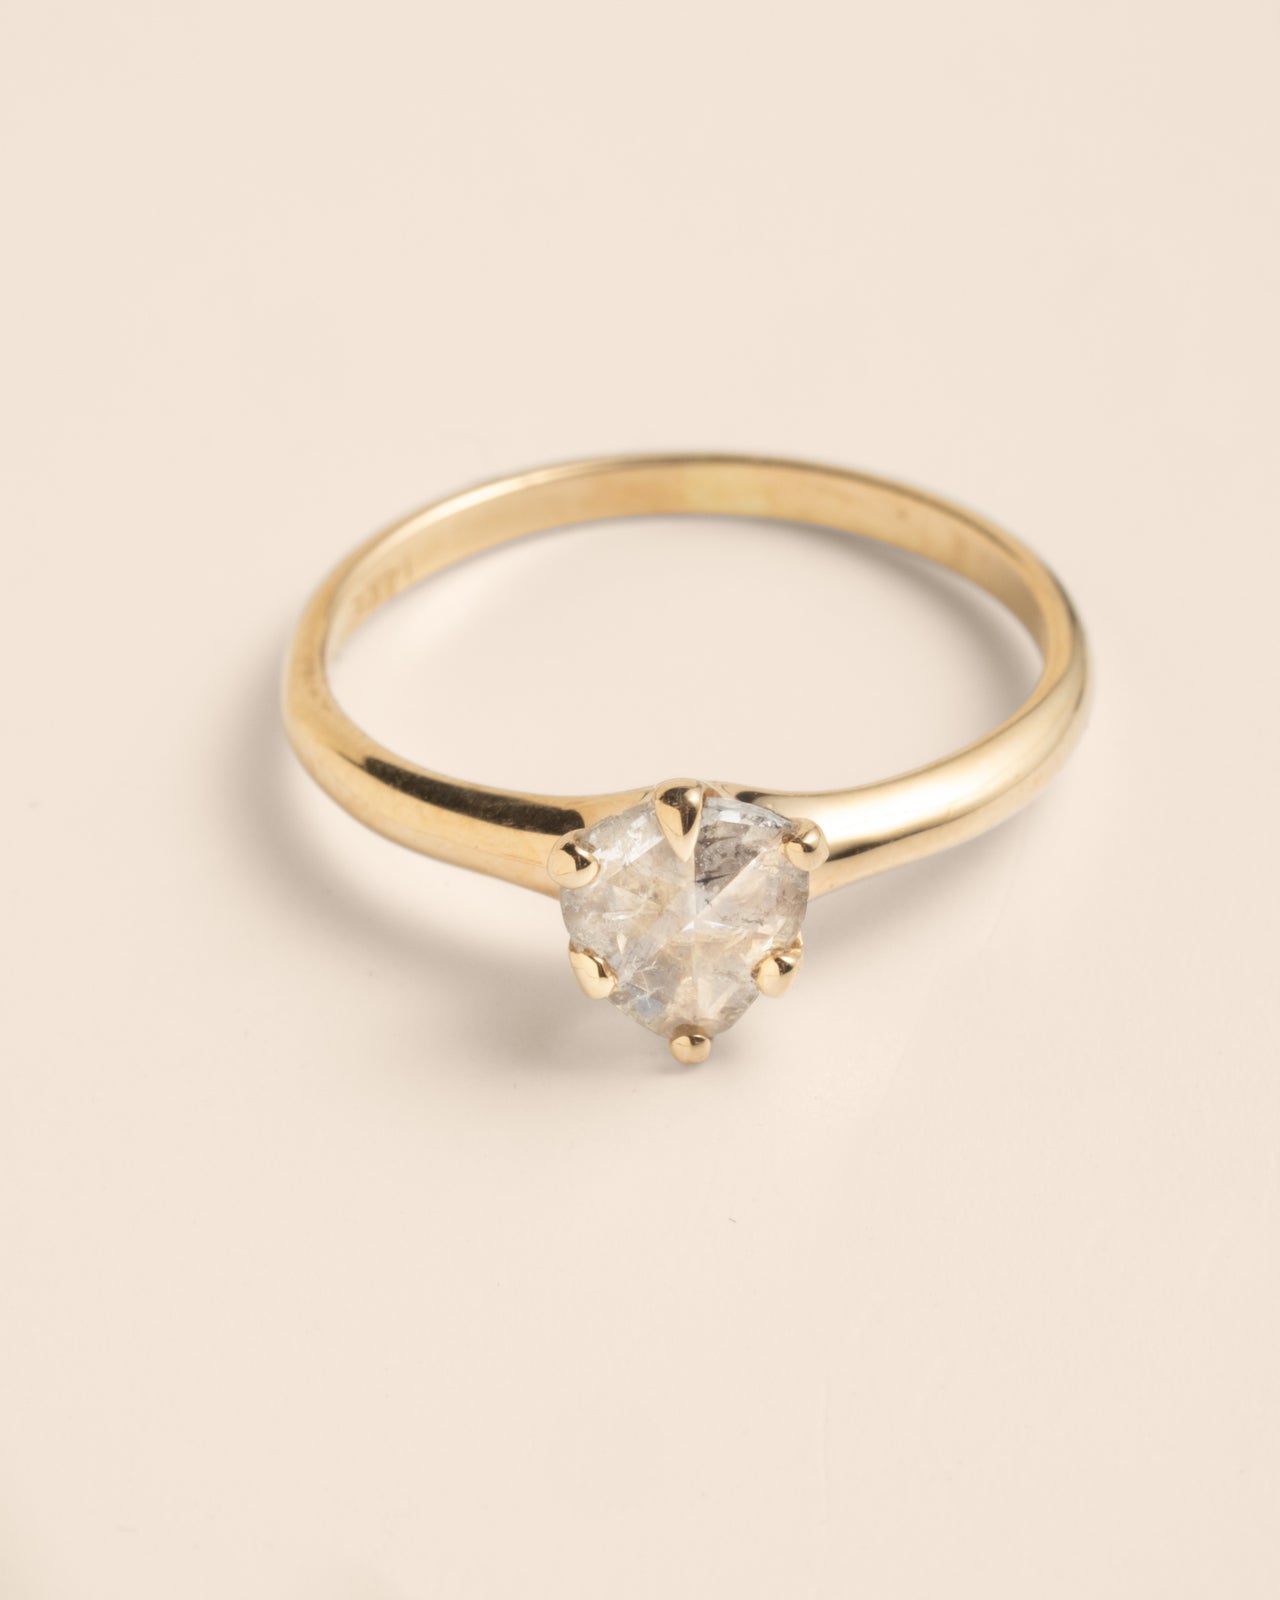 Antique Rose Cut Diamond Solitaire Ring in 14k Gold - Photo 2